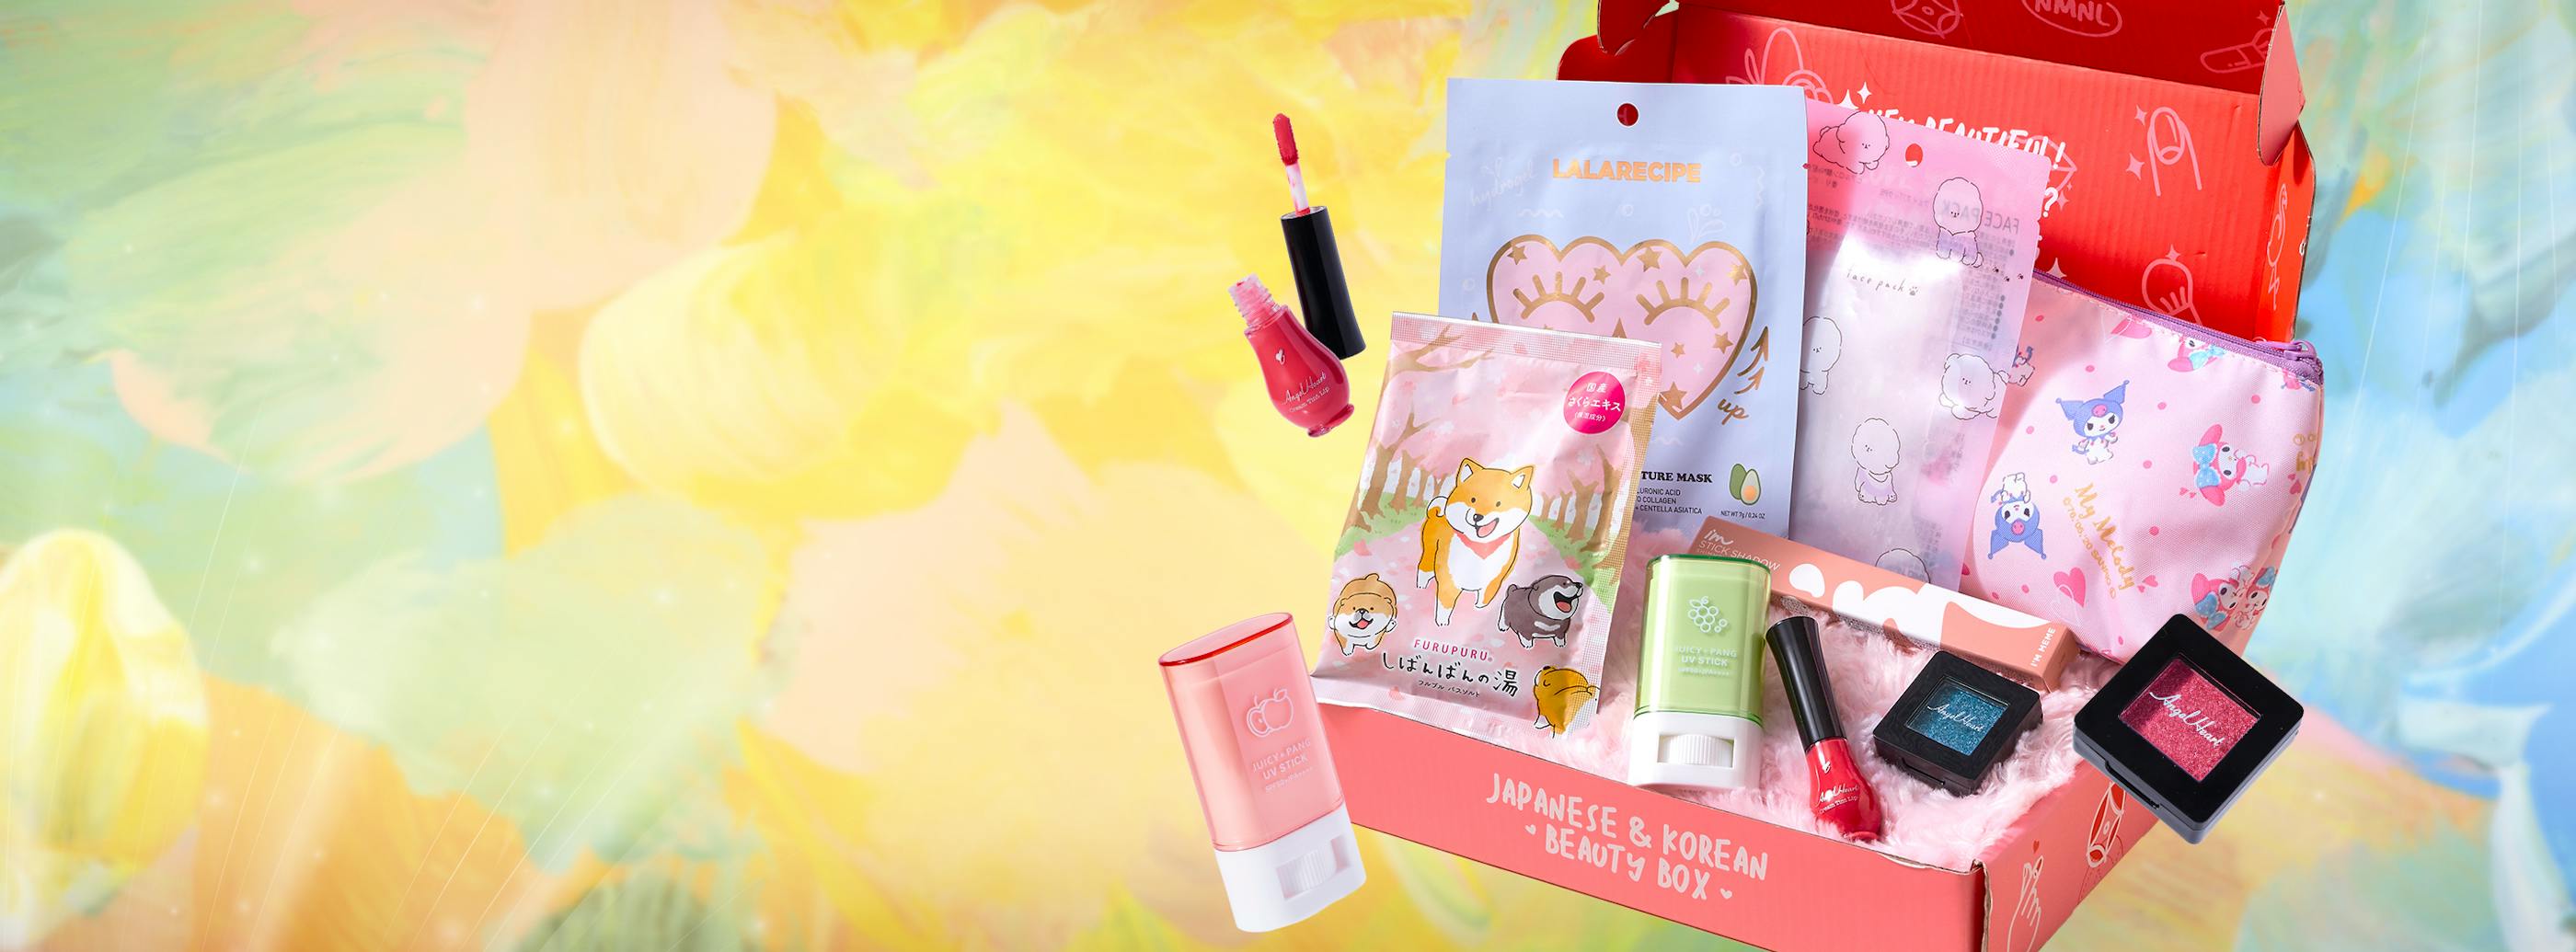 Sign up by March 15th to get eight Japanese & Korean products in your Springtime Refresh box.